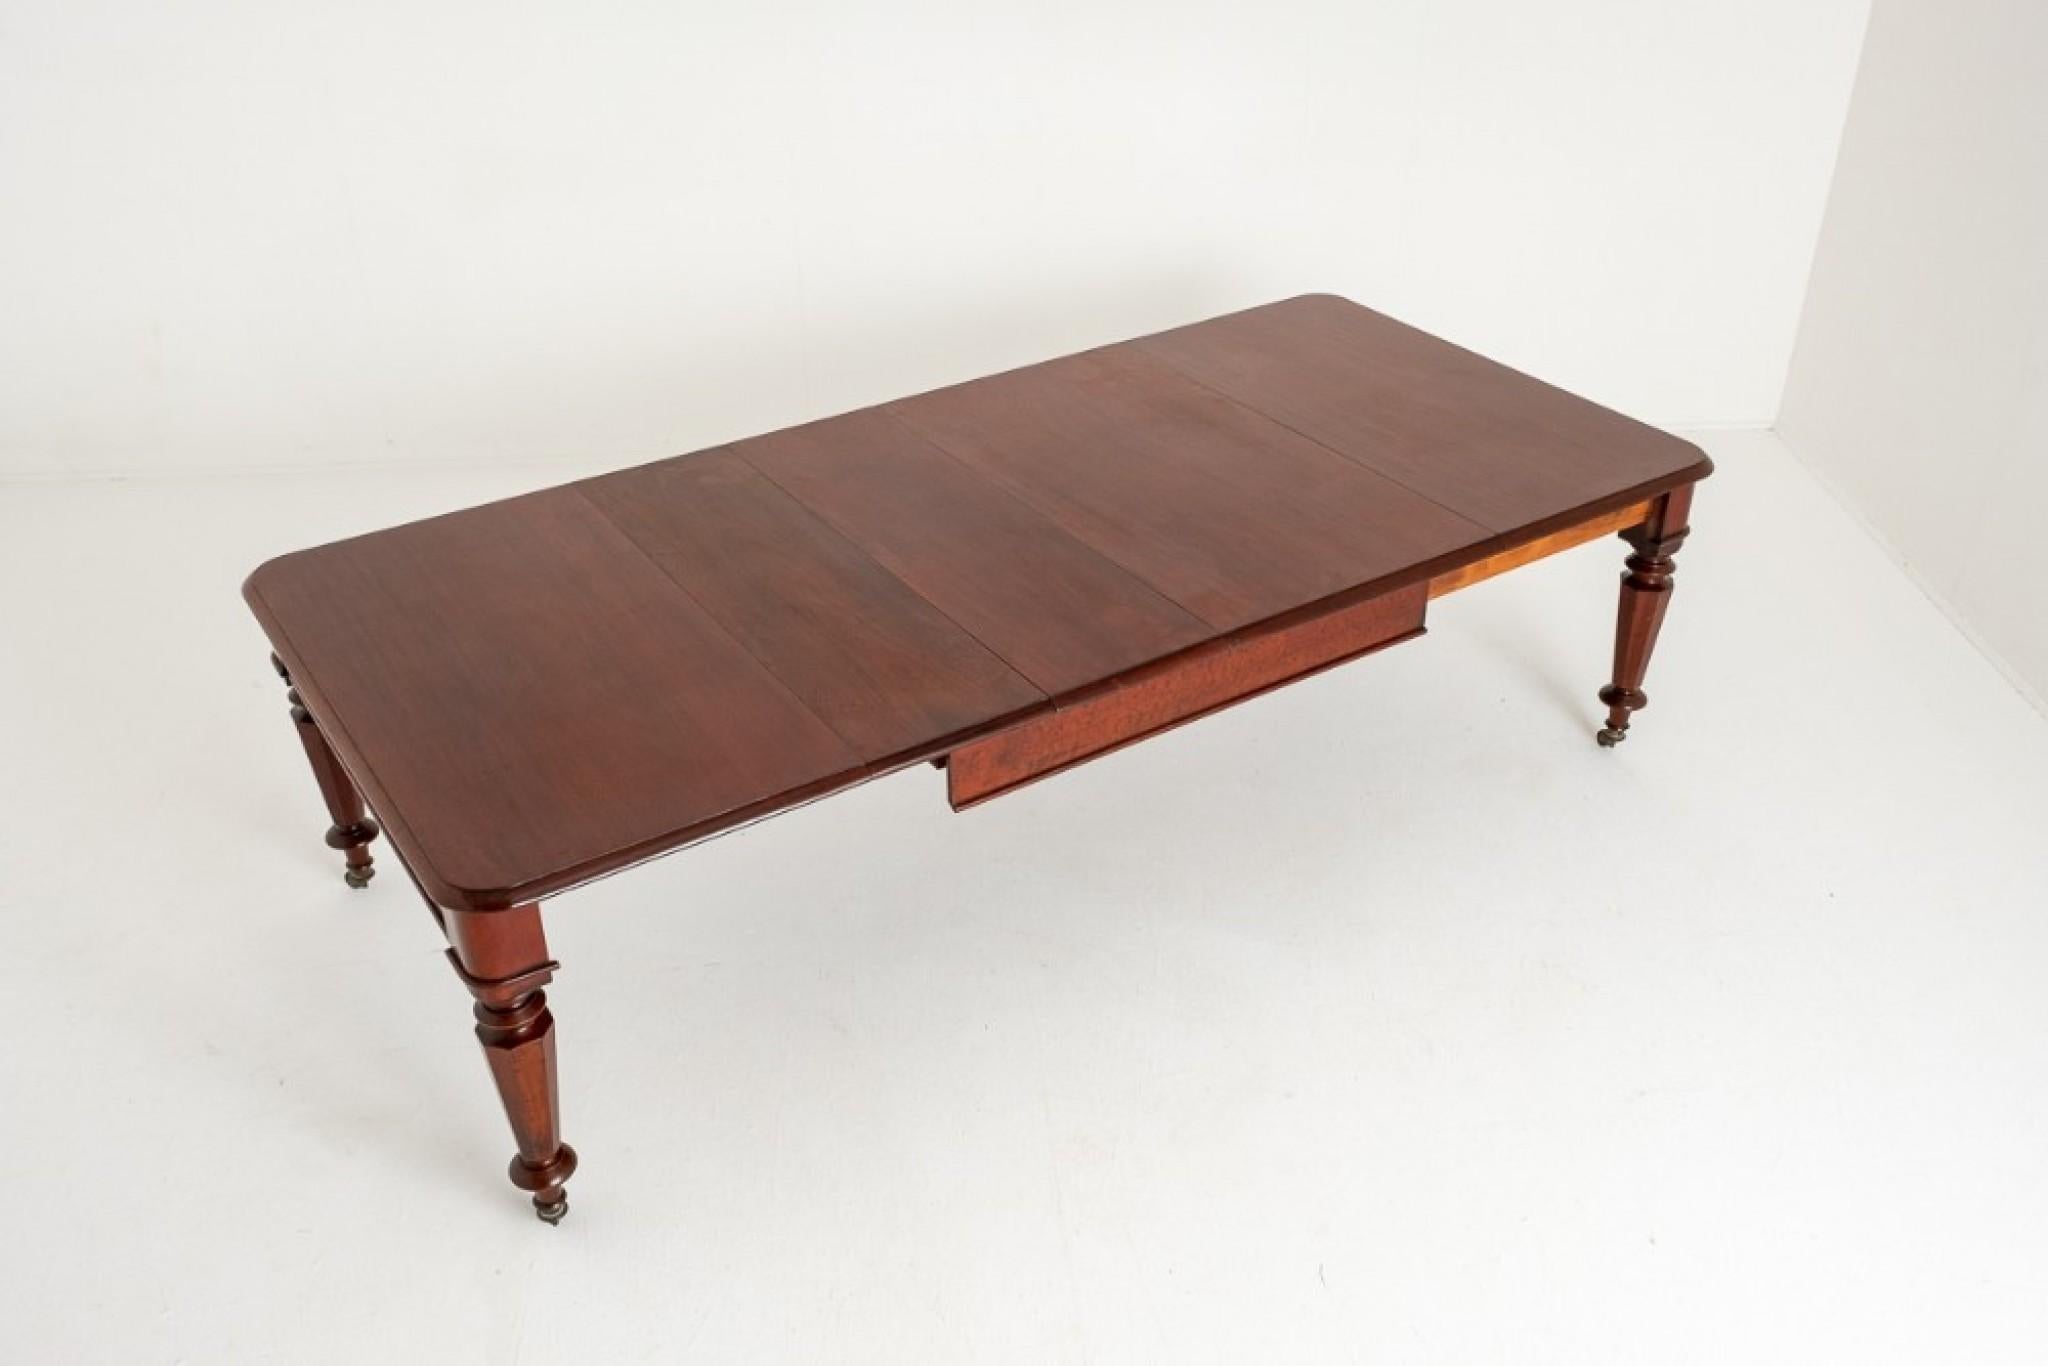 10 - 12 Seat William IV Mahogany Extending Dining Table.
This Quality Dining Table Stands upon Faceted Legs with Original Brass Castors.
19th century
The Table Extends by Way of a Pullout Telescopic Mechanism to Accept up to 3 Extra Leaves.
The